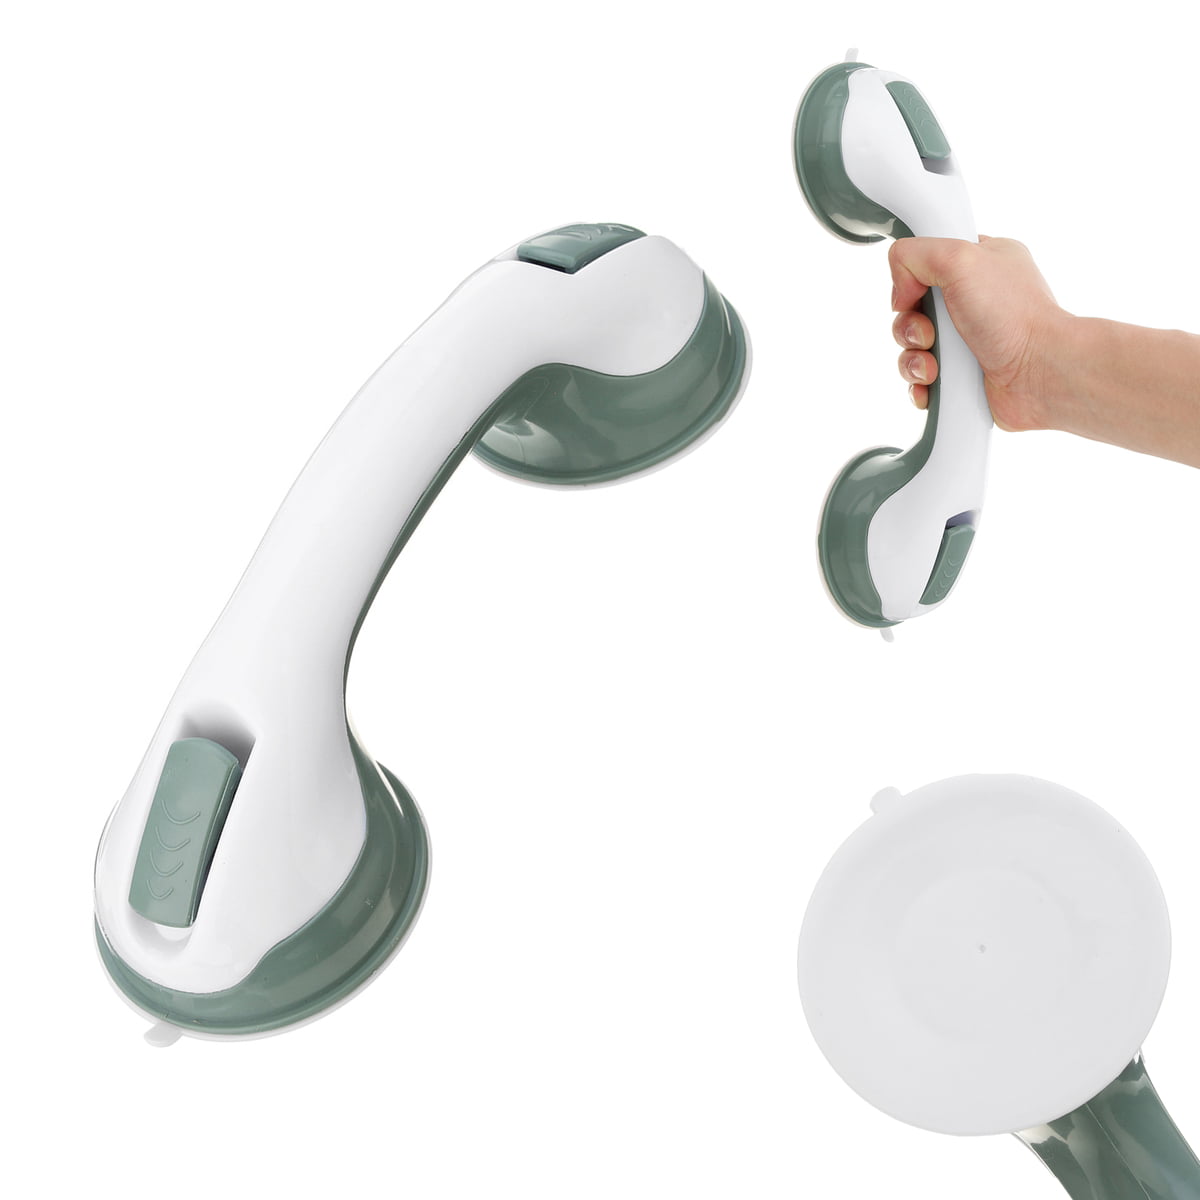 Ystter Suction Cup Style Handrail Handle Strong Sucker Installation Hand Grip Handrail for Bedroom Bath Room Bathroom Accessories